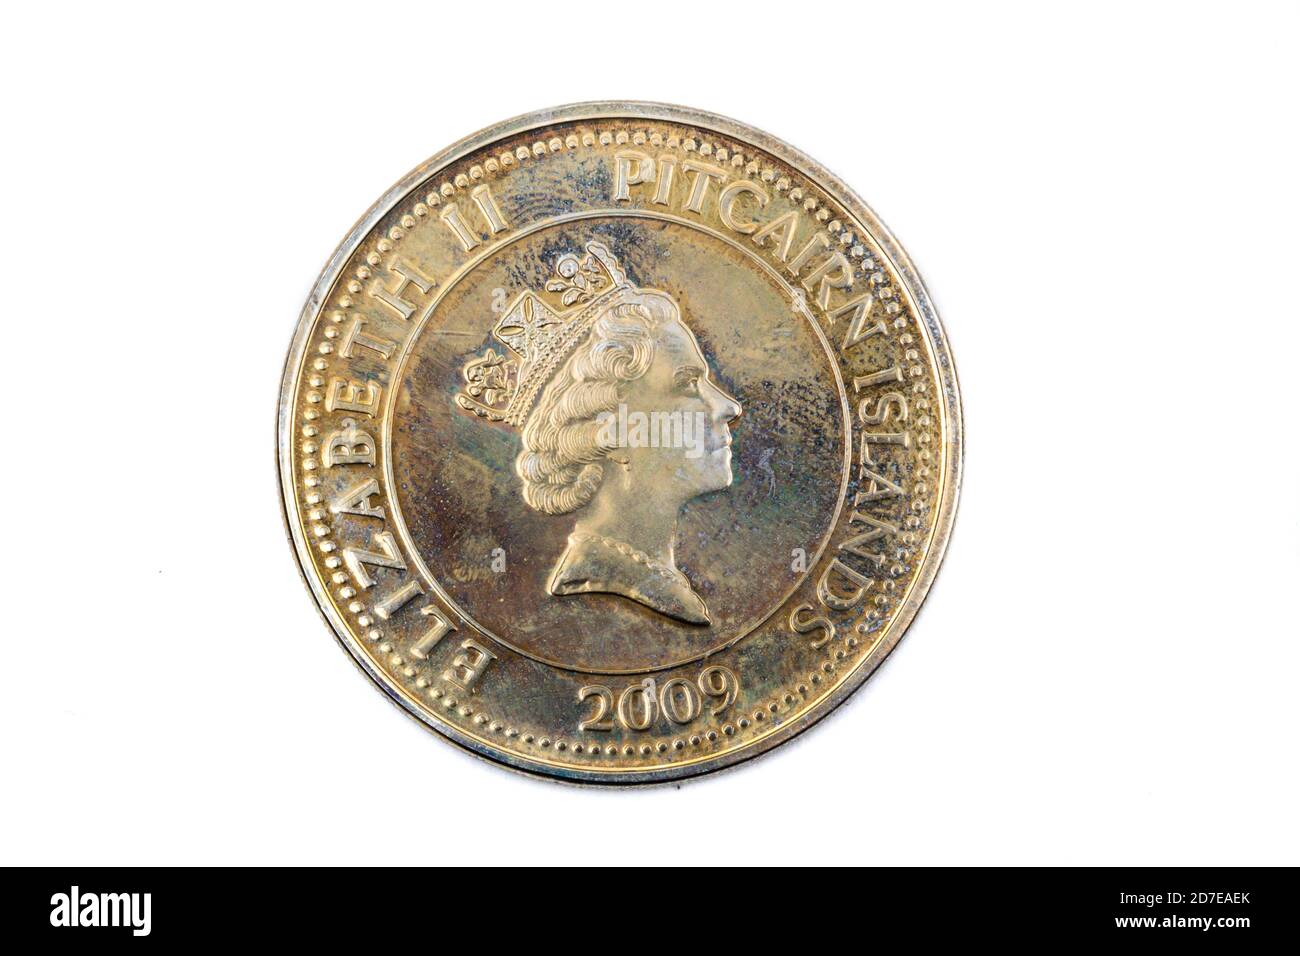 A close up view of a One Dollar Coin from the Pitcairn Islands Stock Photo